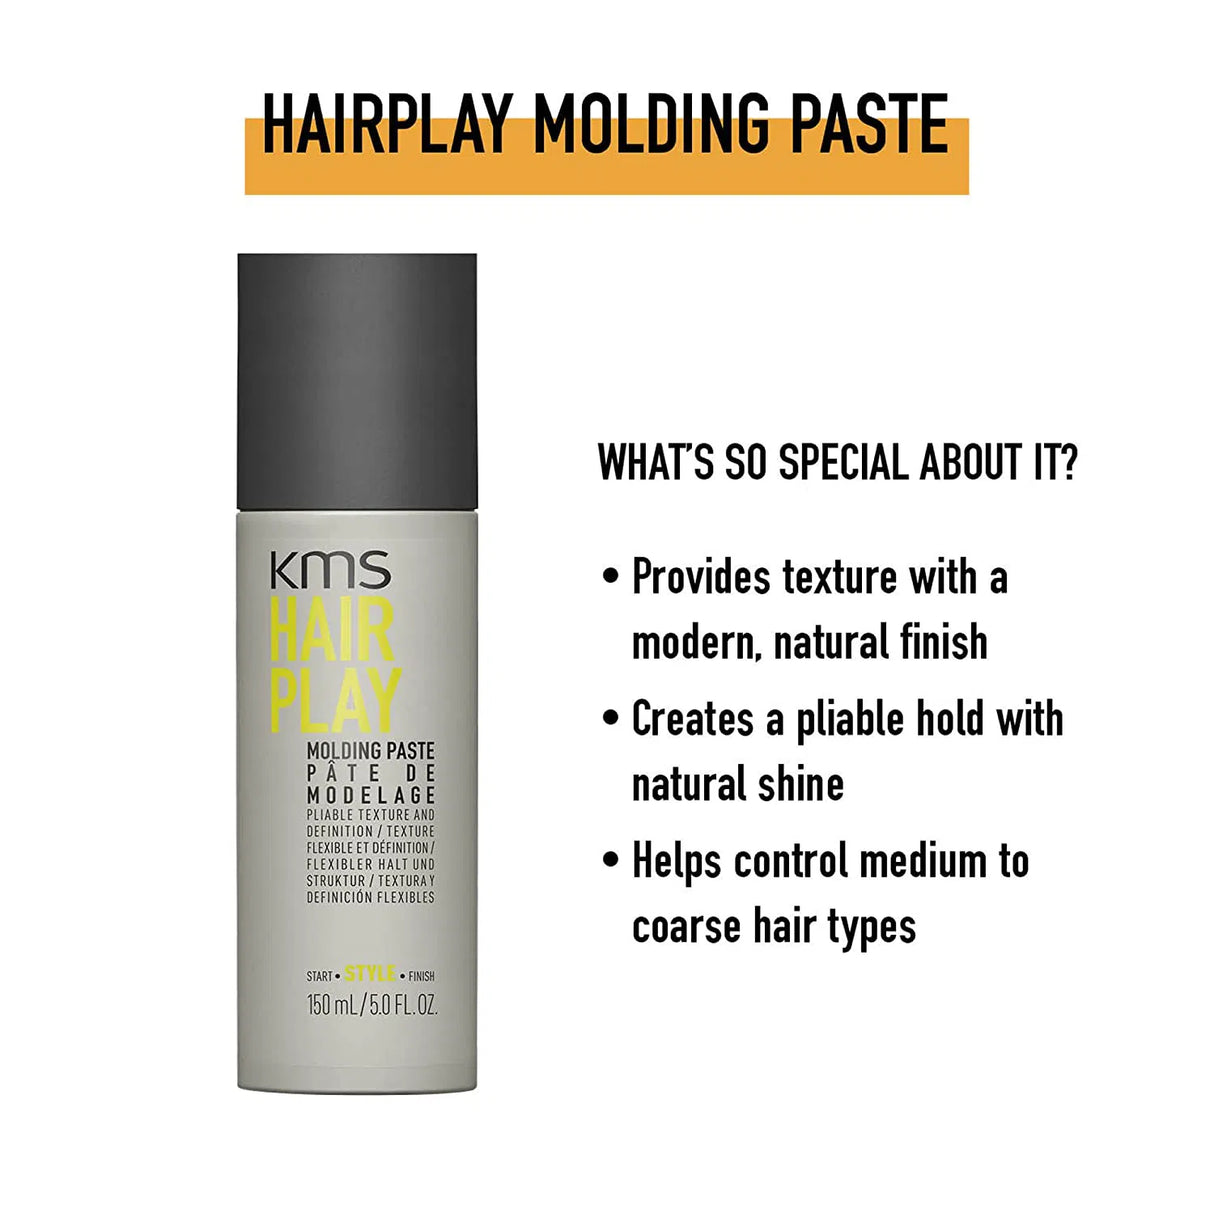 Hairplay Molding Paste